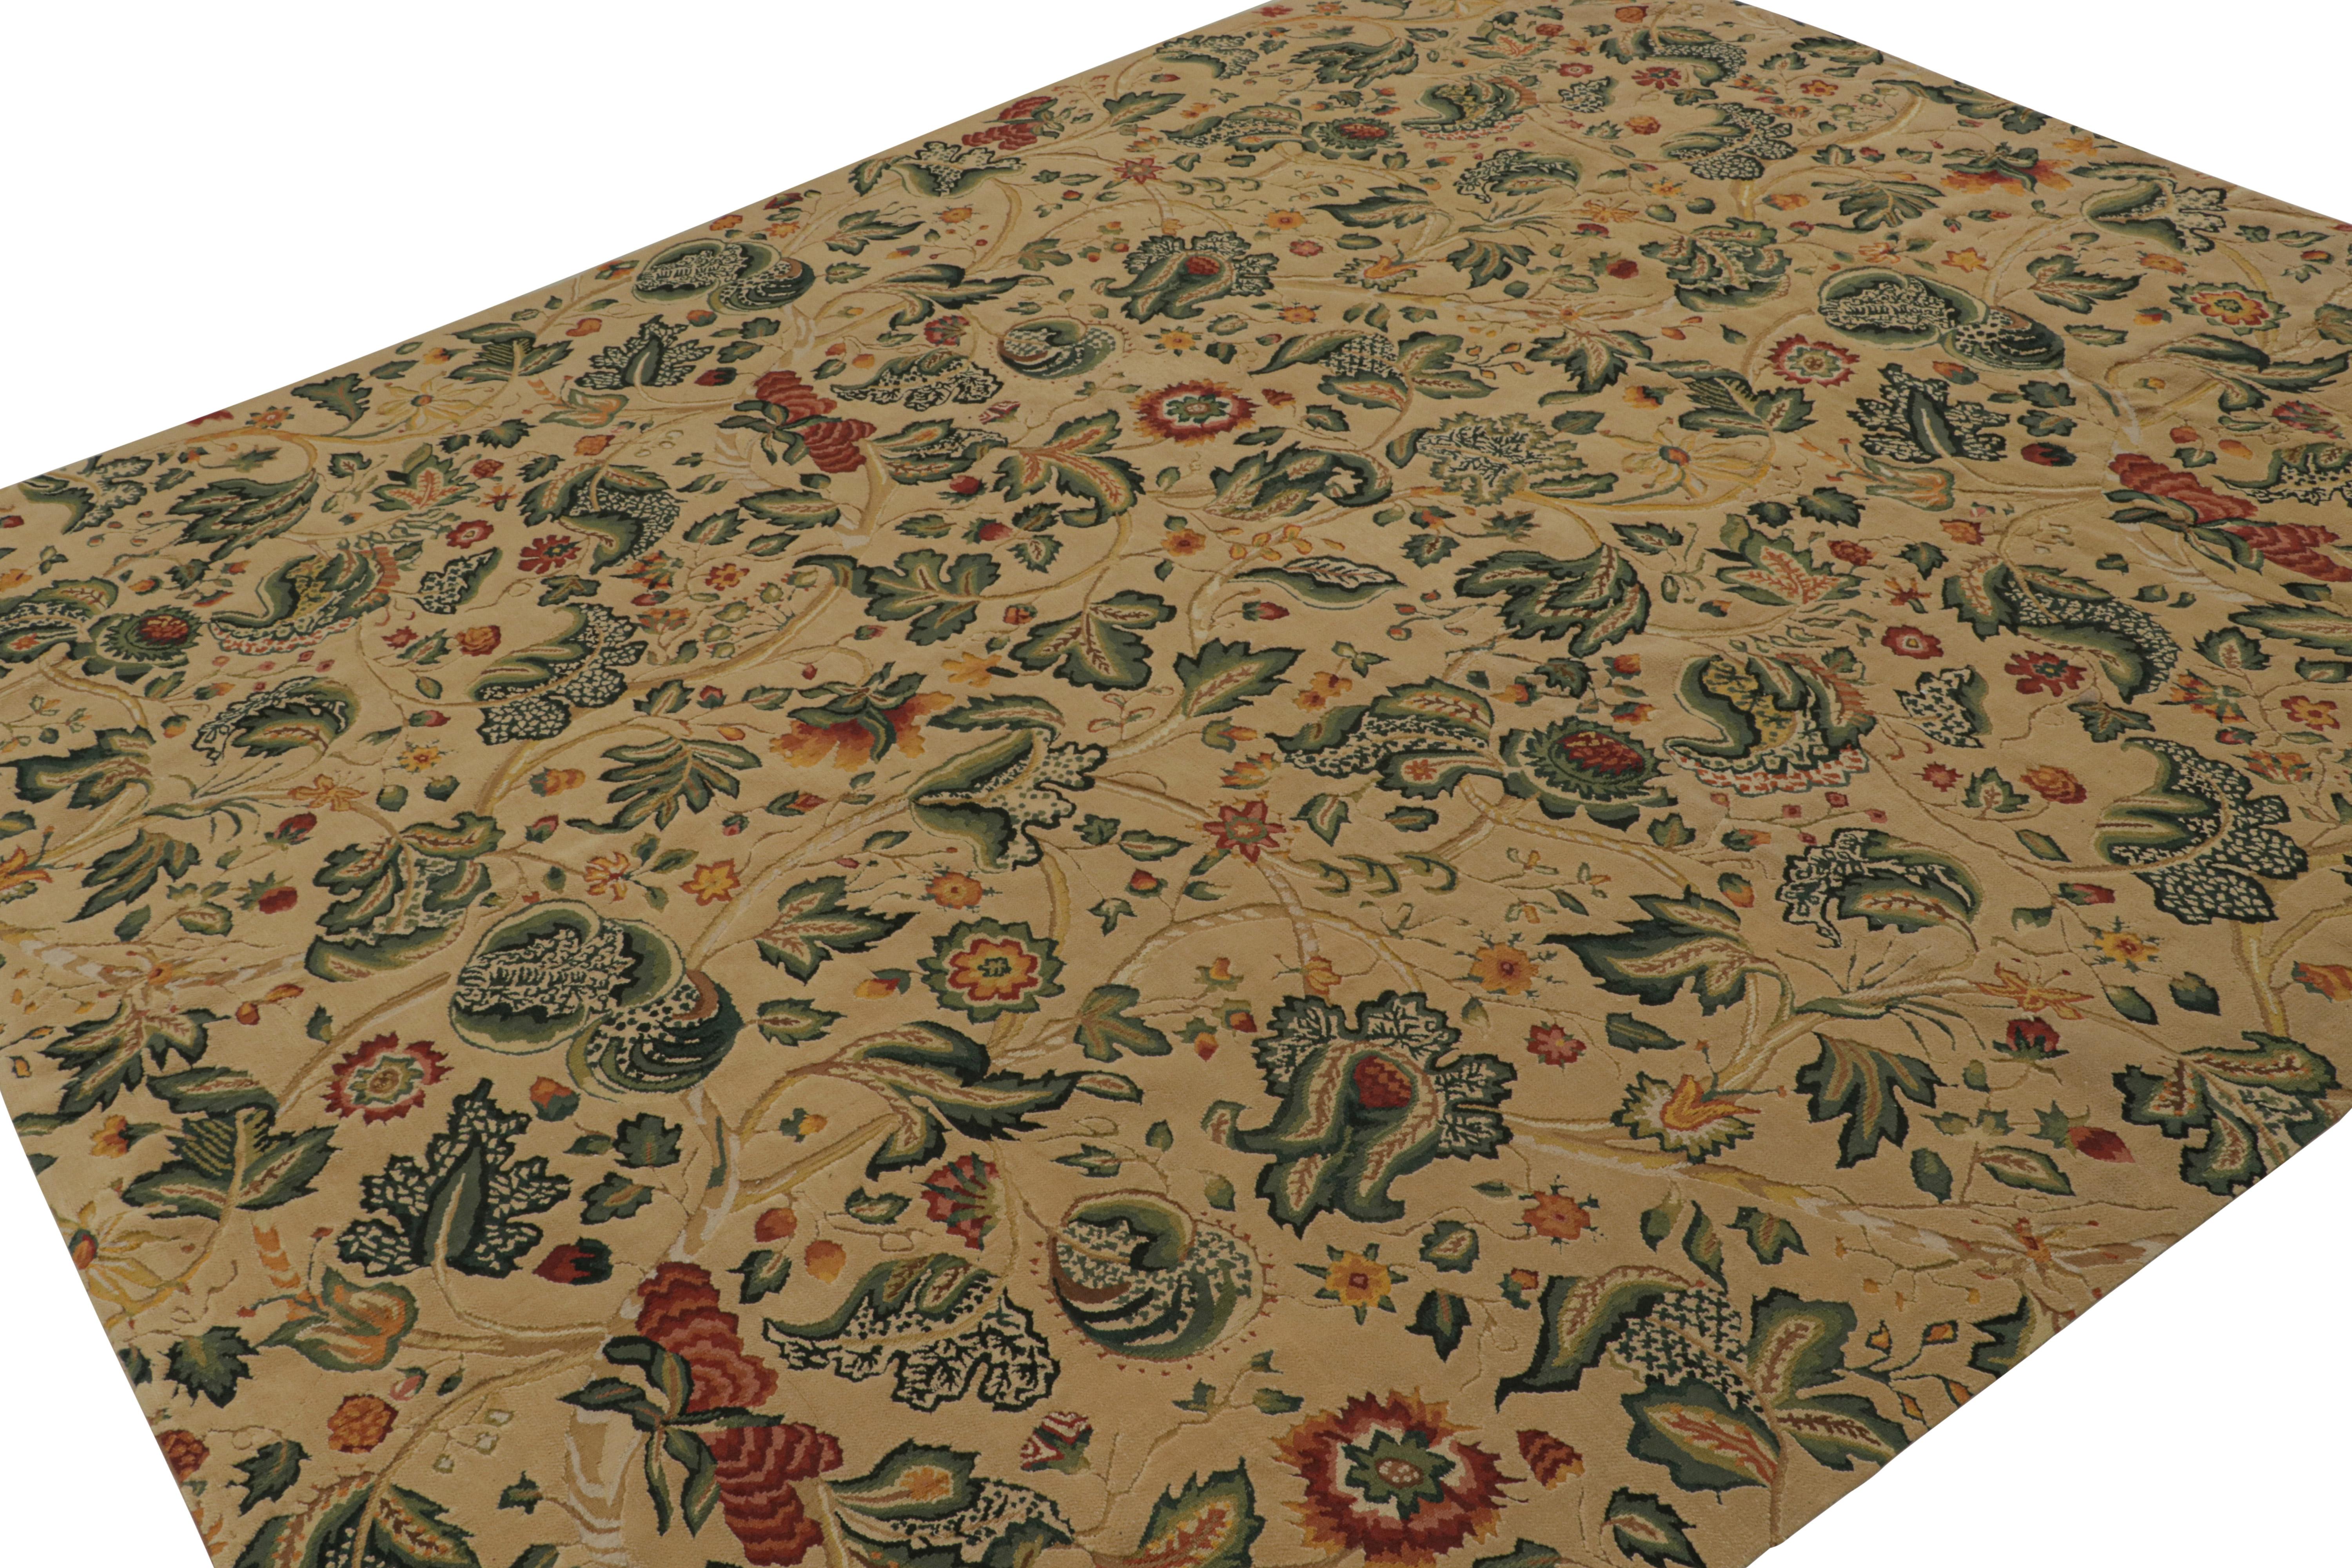 Handwoven in wool, this 9x10 European flatweave rug has been inspired by 18th century English Tudor rugs and tapestries. The design features floral patterns in green, red, gold and teal accents across the field. 

On the Design: 

Keen eyes will